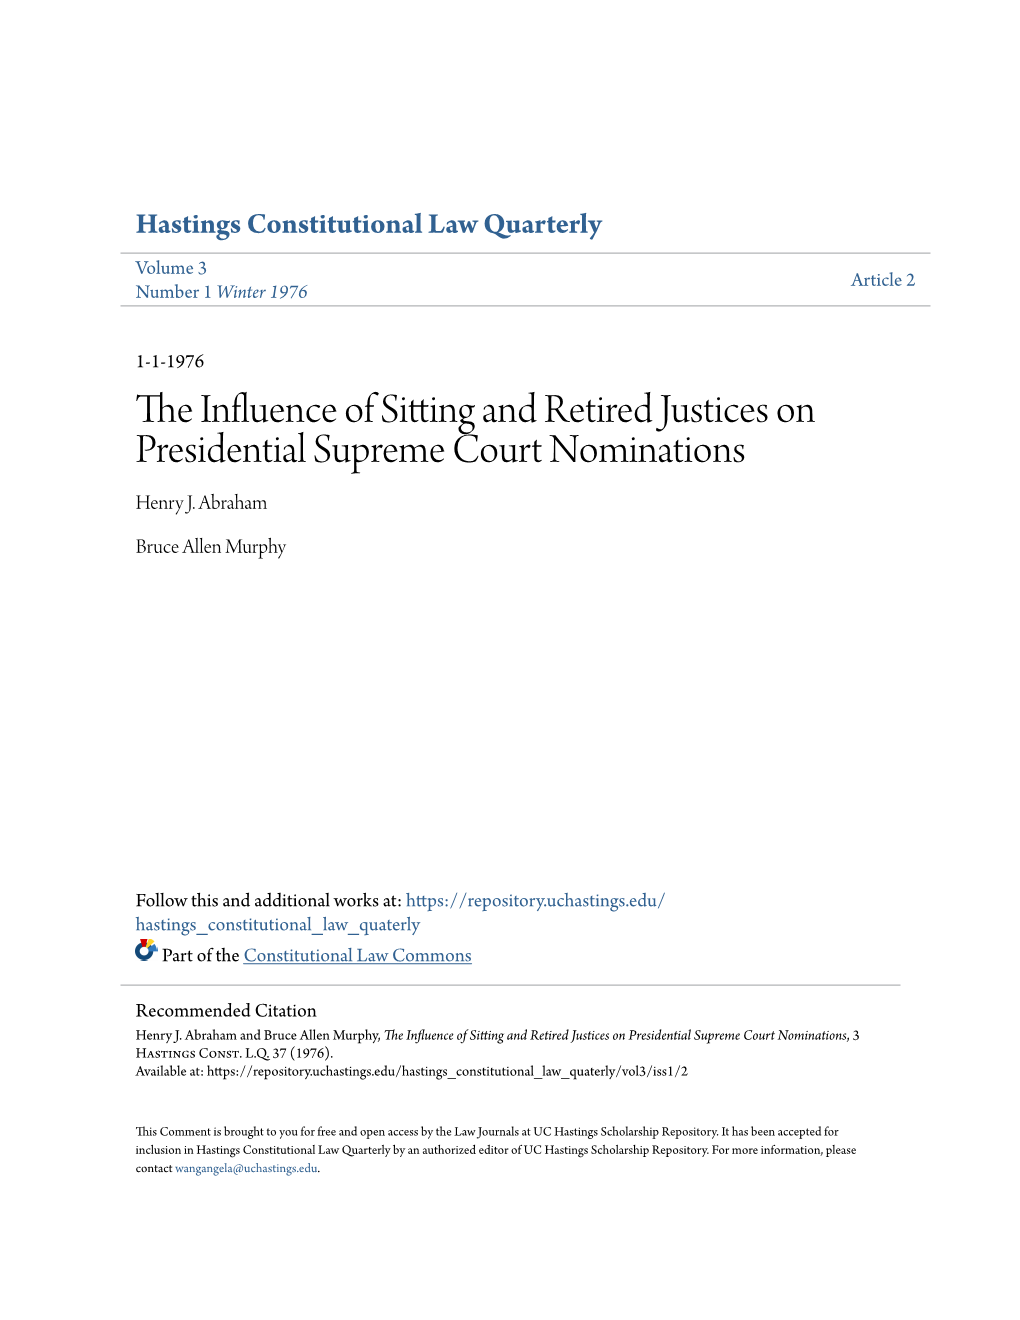 The Influence of Sitting and Retired Justices on Presidential Supreme Court Nominations, 3 Hastings Const